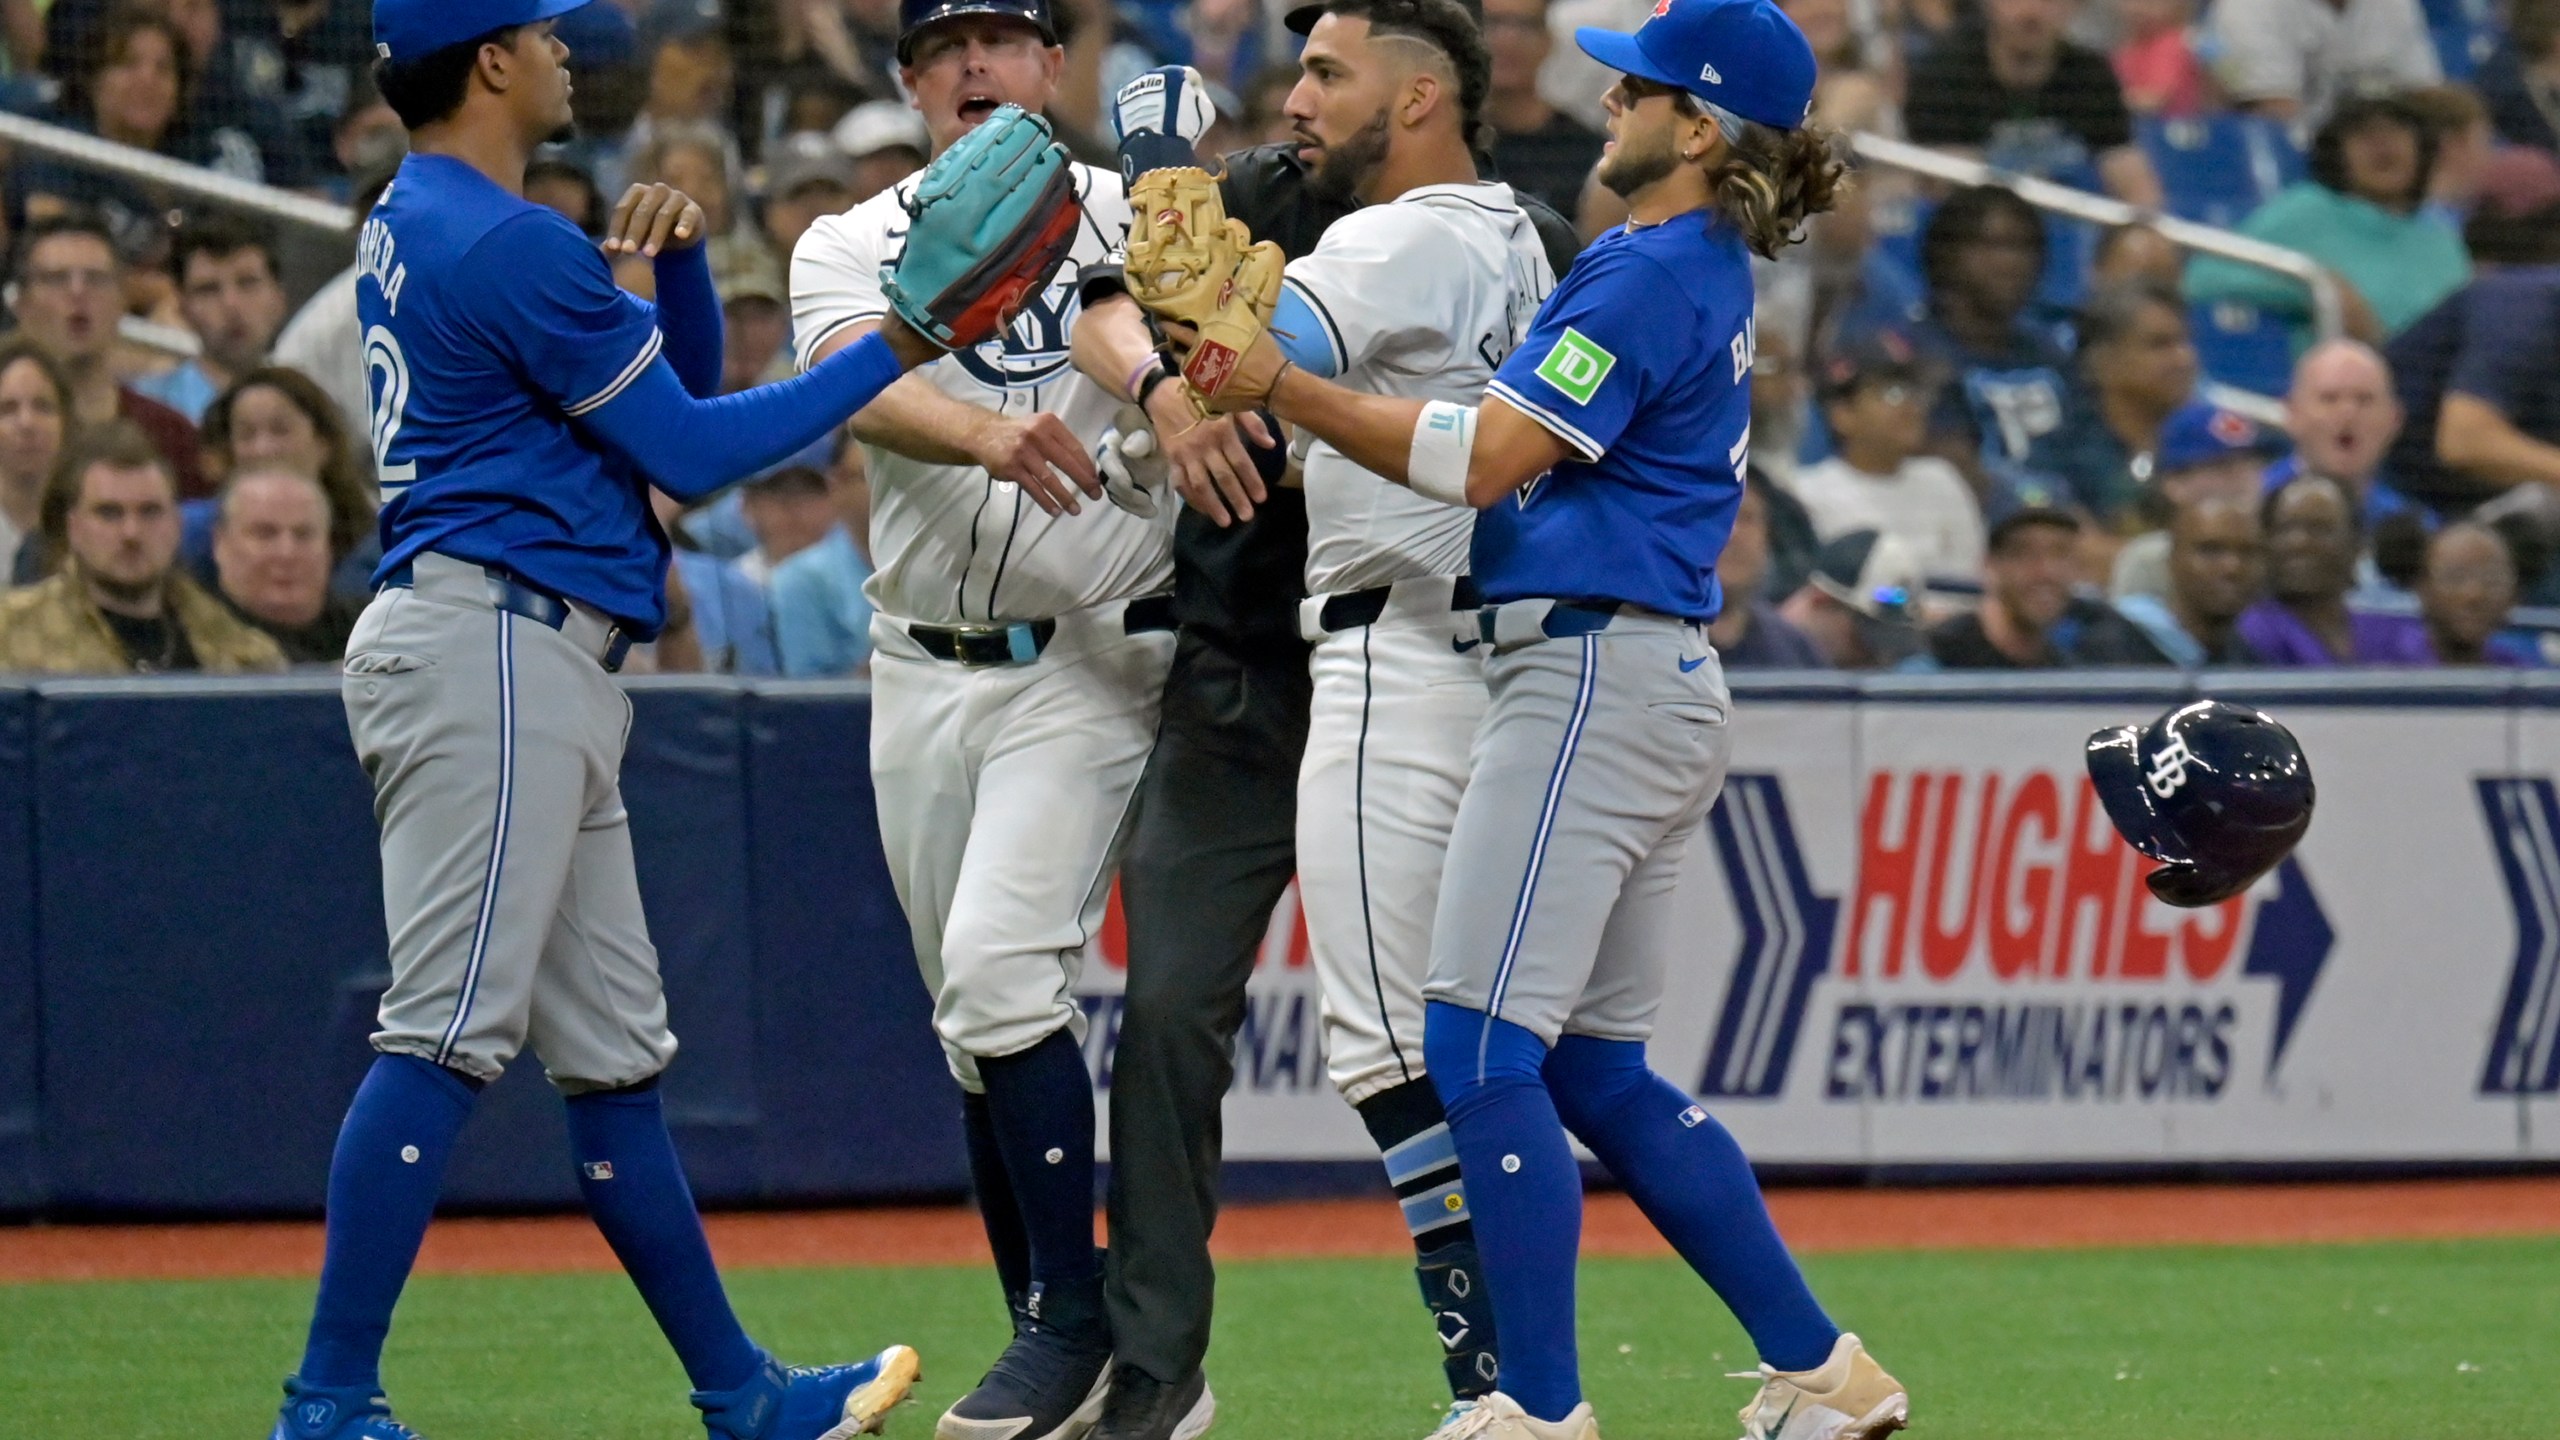 Tampa Bay Rays third base coach Brady Williams, center left, and Toronto Blue Jays shortstop Bo Bichette, right, try to break up a confrontation between Tampa Bay's Jose Caballero, center right, and Toronto Blue Jays reliever Genesis Cabrera, left, after Cabrera pushed Caballero during the seventh inning of a baseball game, Saturday, March 30, 2024, in St. Petersburg, Fla. (AP Photo/Steve Nesius)